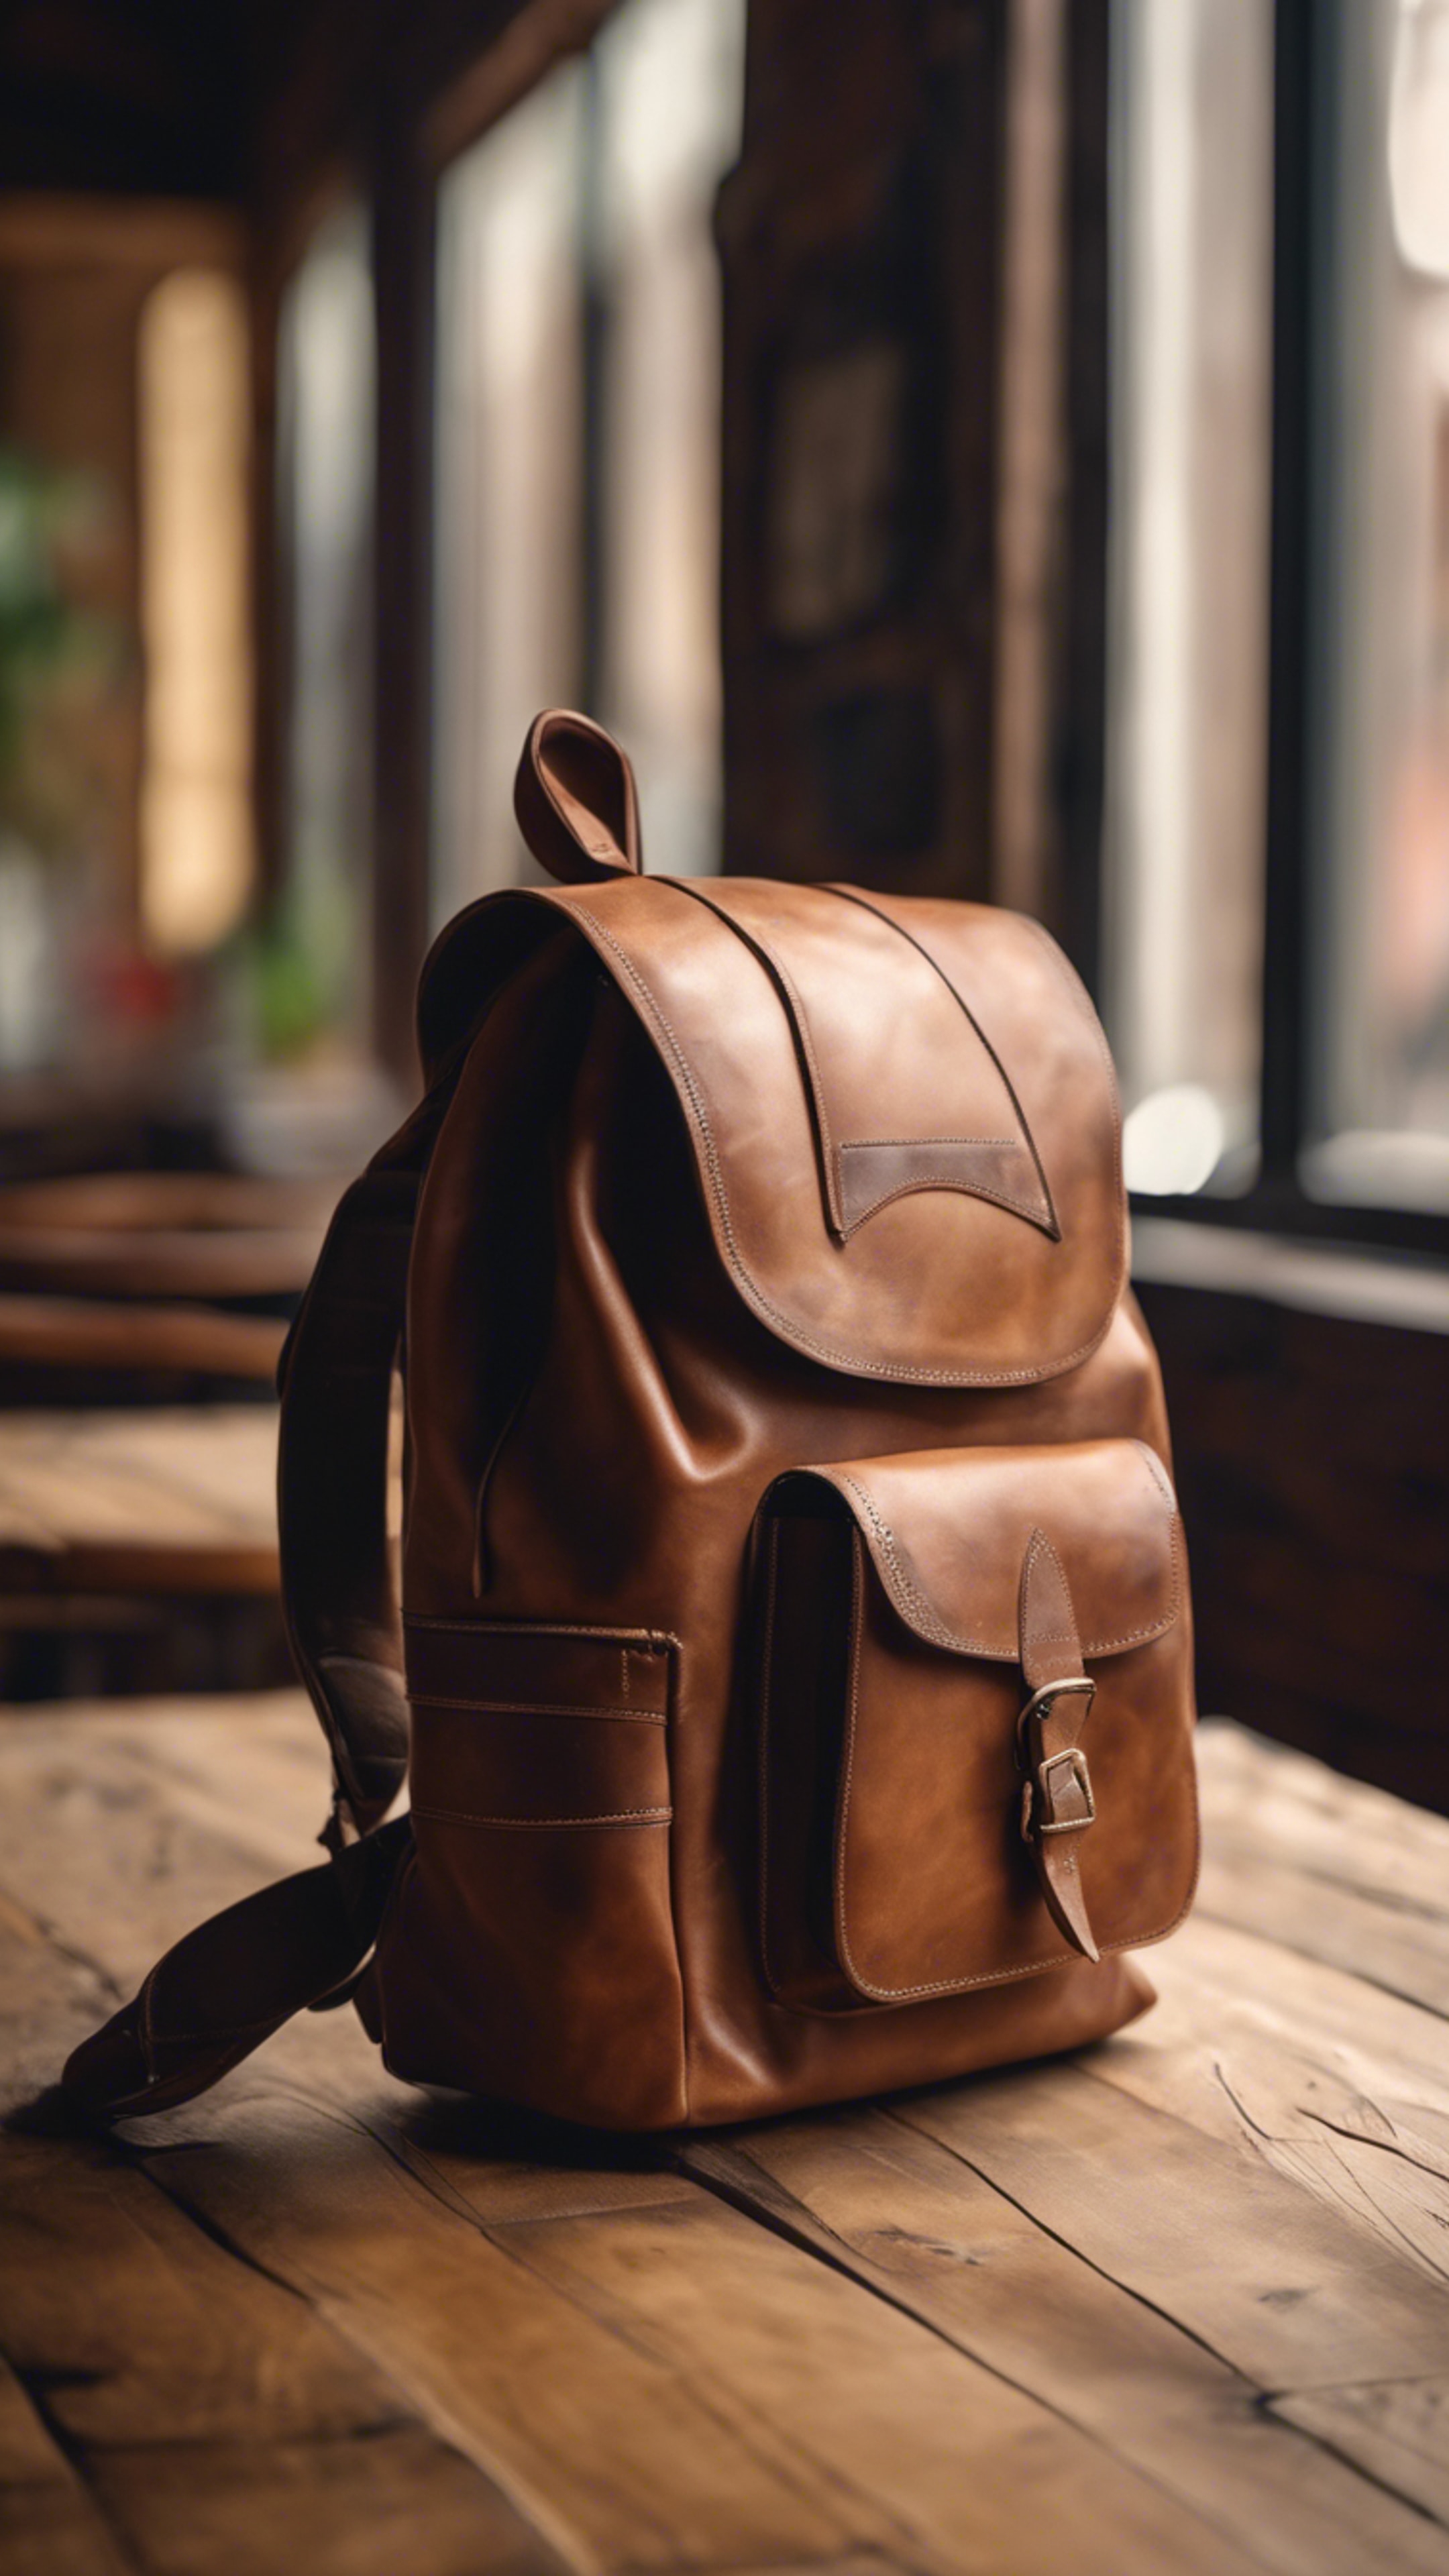 A vintage brown leather backpack sitting on a wooden table in a cozy café. Sfondo[7ce12483b5e34217b072]